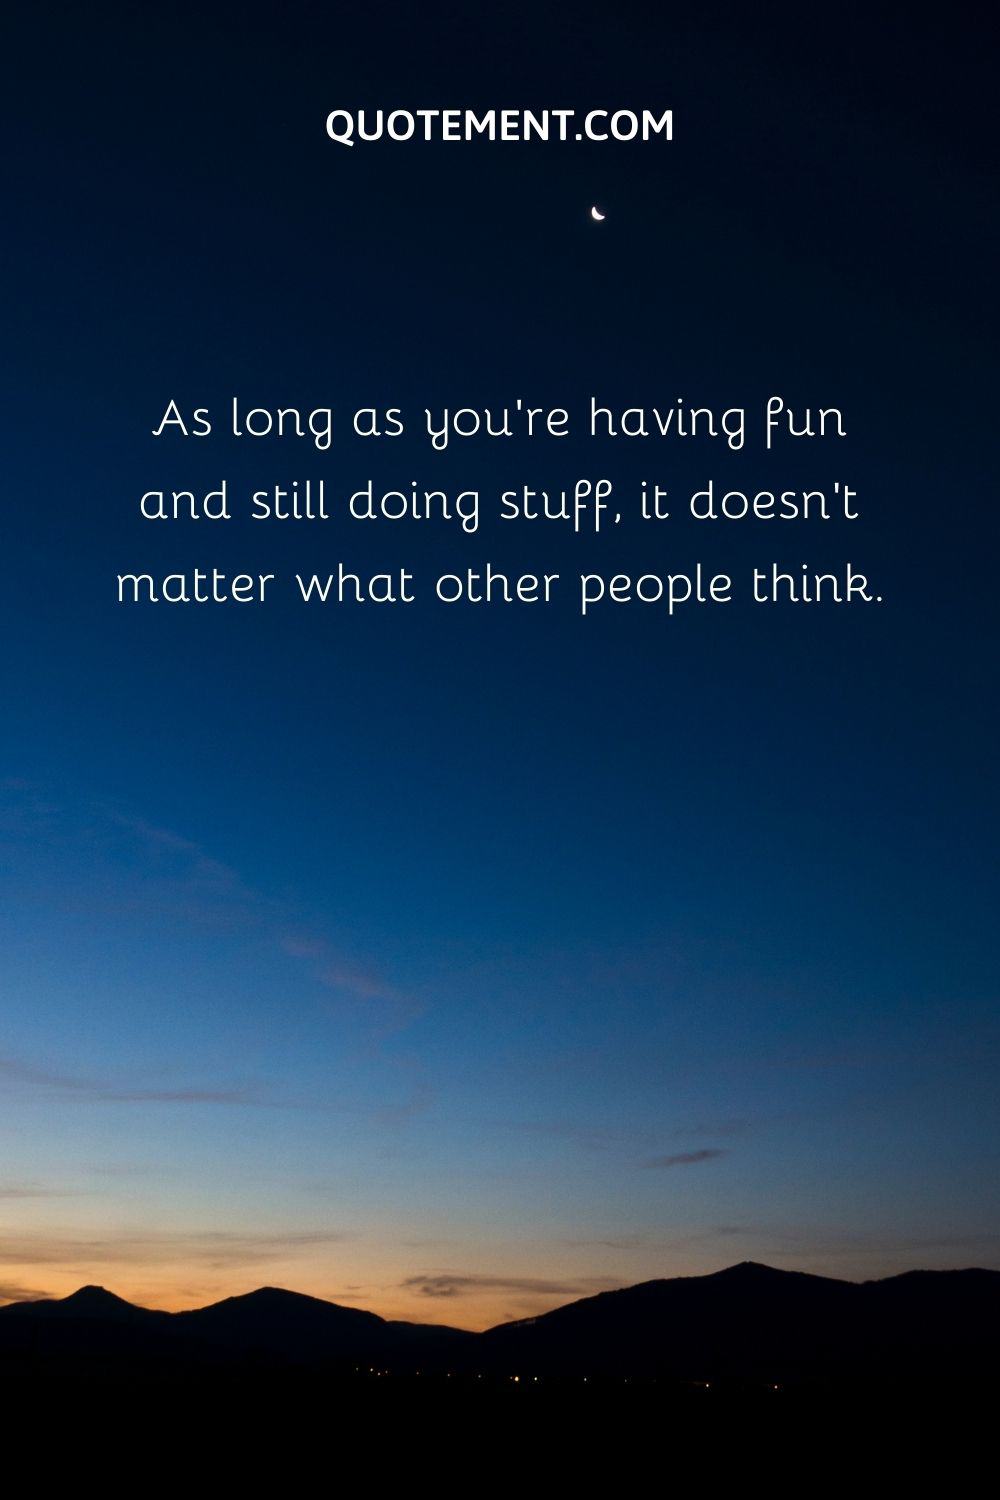 As long as you're having fun and still doing stuff, it doesn't matter what other people think